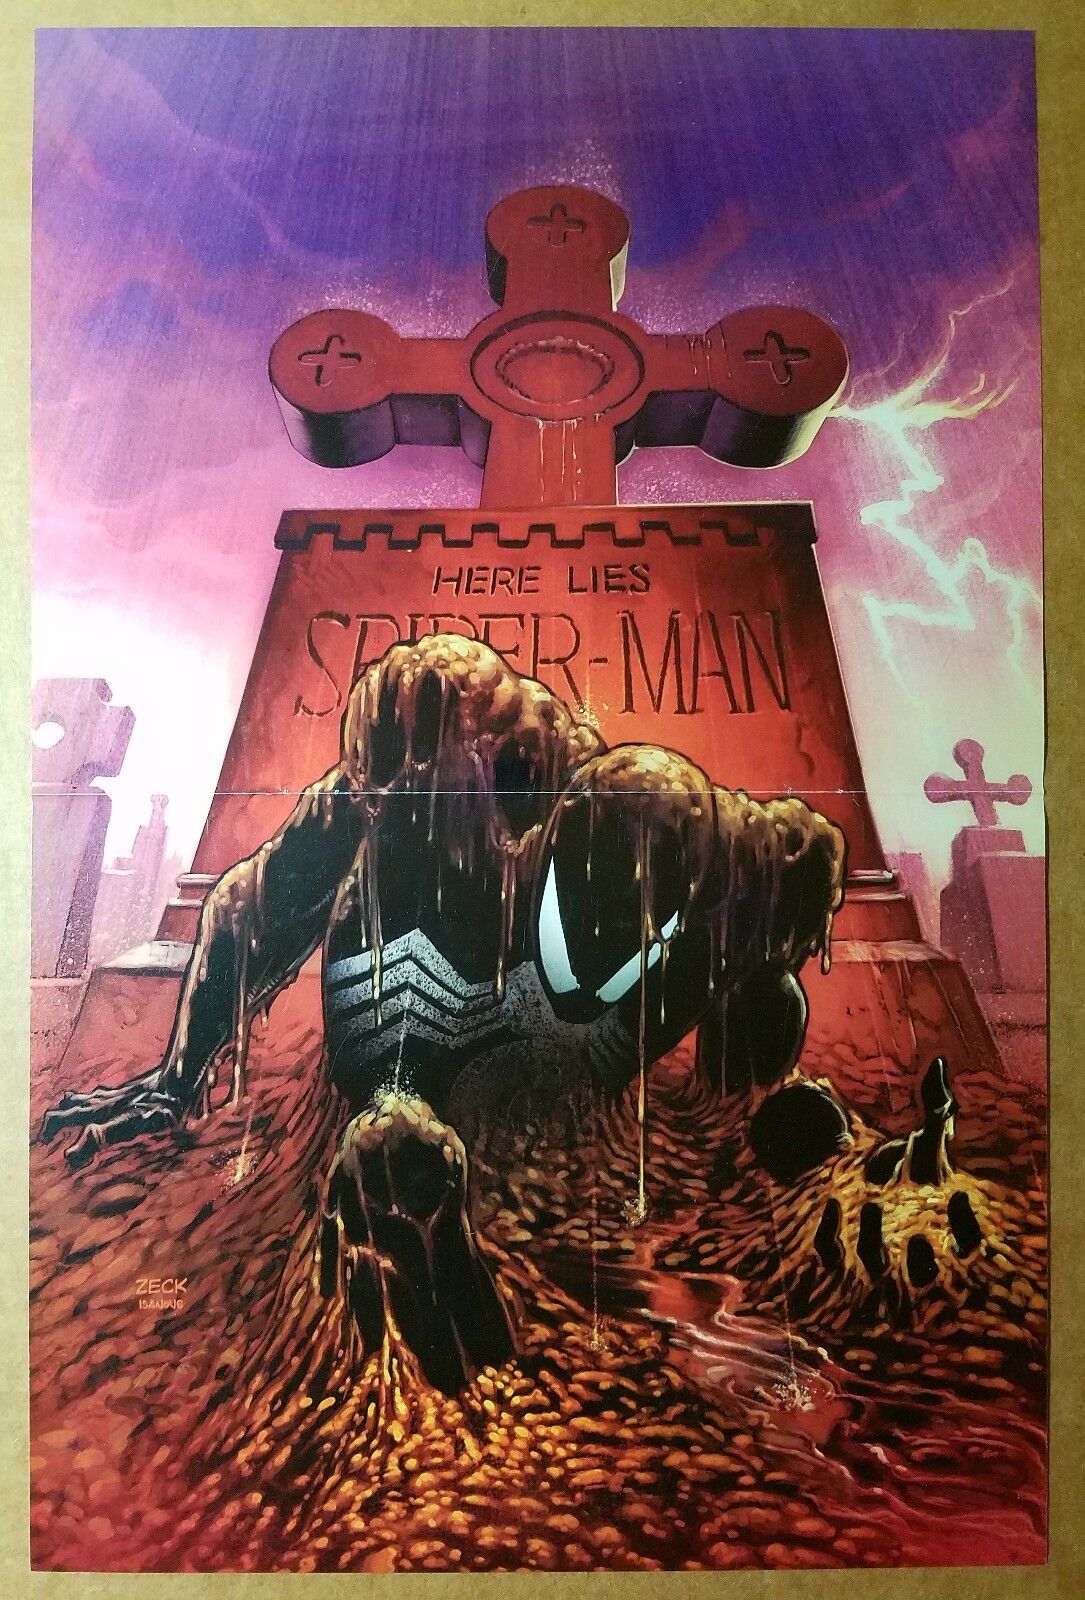 Here Lies Spider-Man Marvel Comics Poster by Mike Zeck